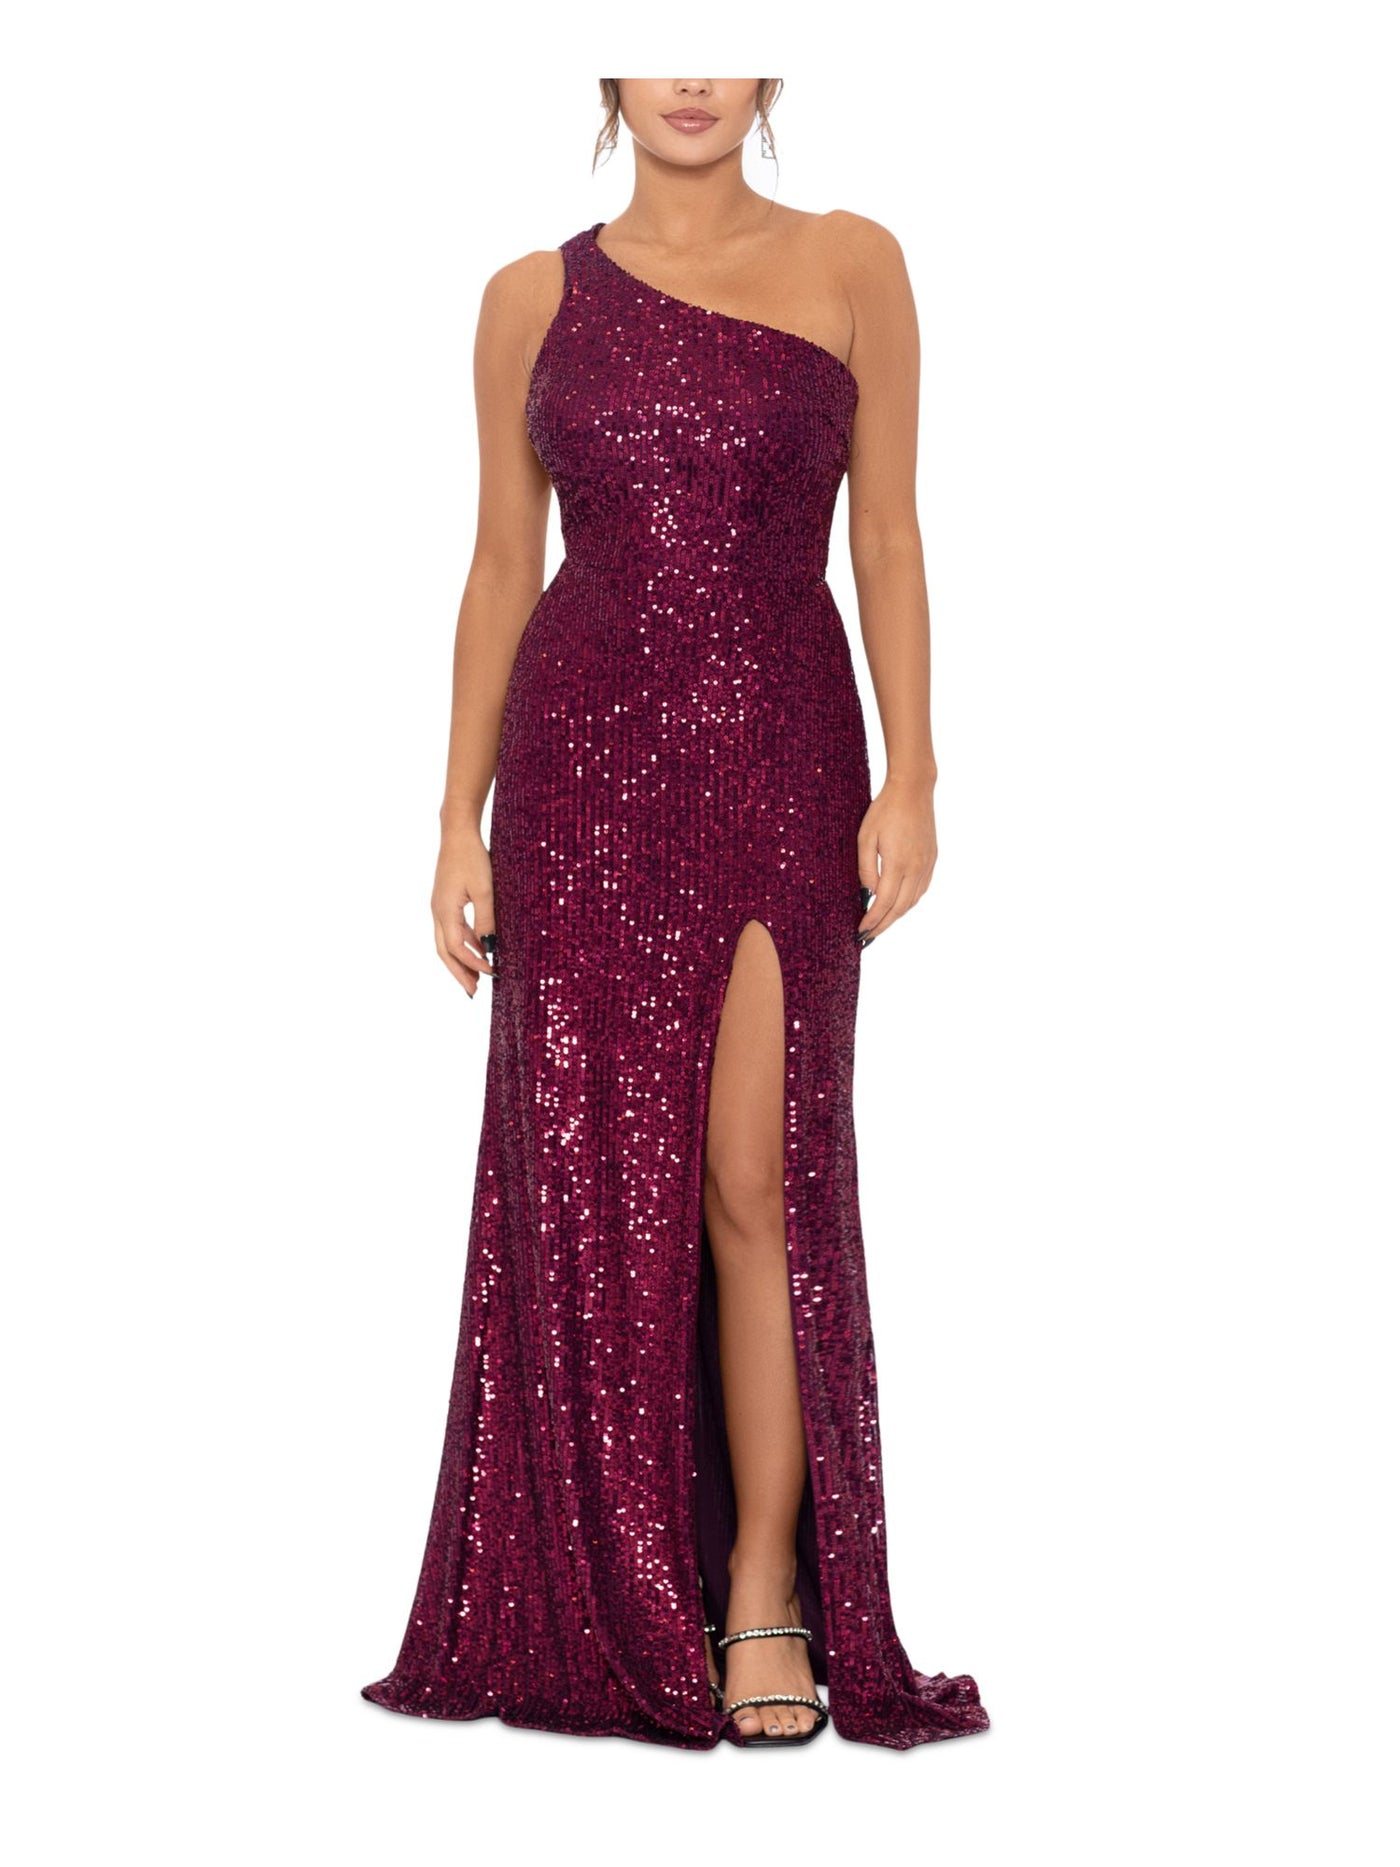 BLONDIE NITES Womens Purple Sequined Zippered Padded Slit Lined Lace Up Back Sleeveless Asymmetrical Neckline Full-Length Formal Gown Dress Juniors 13